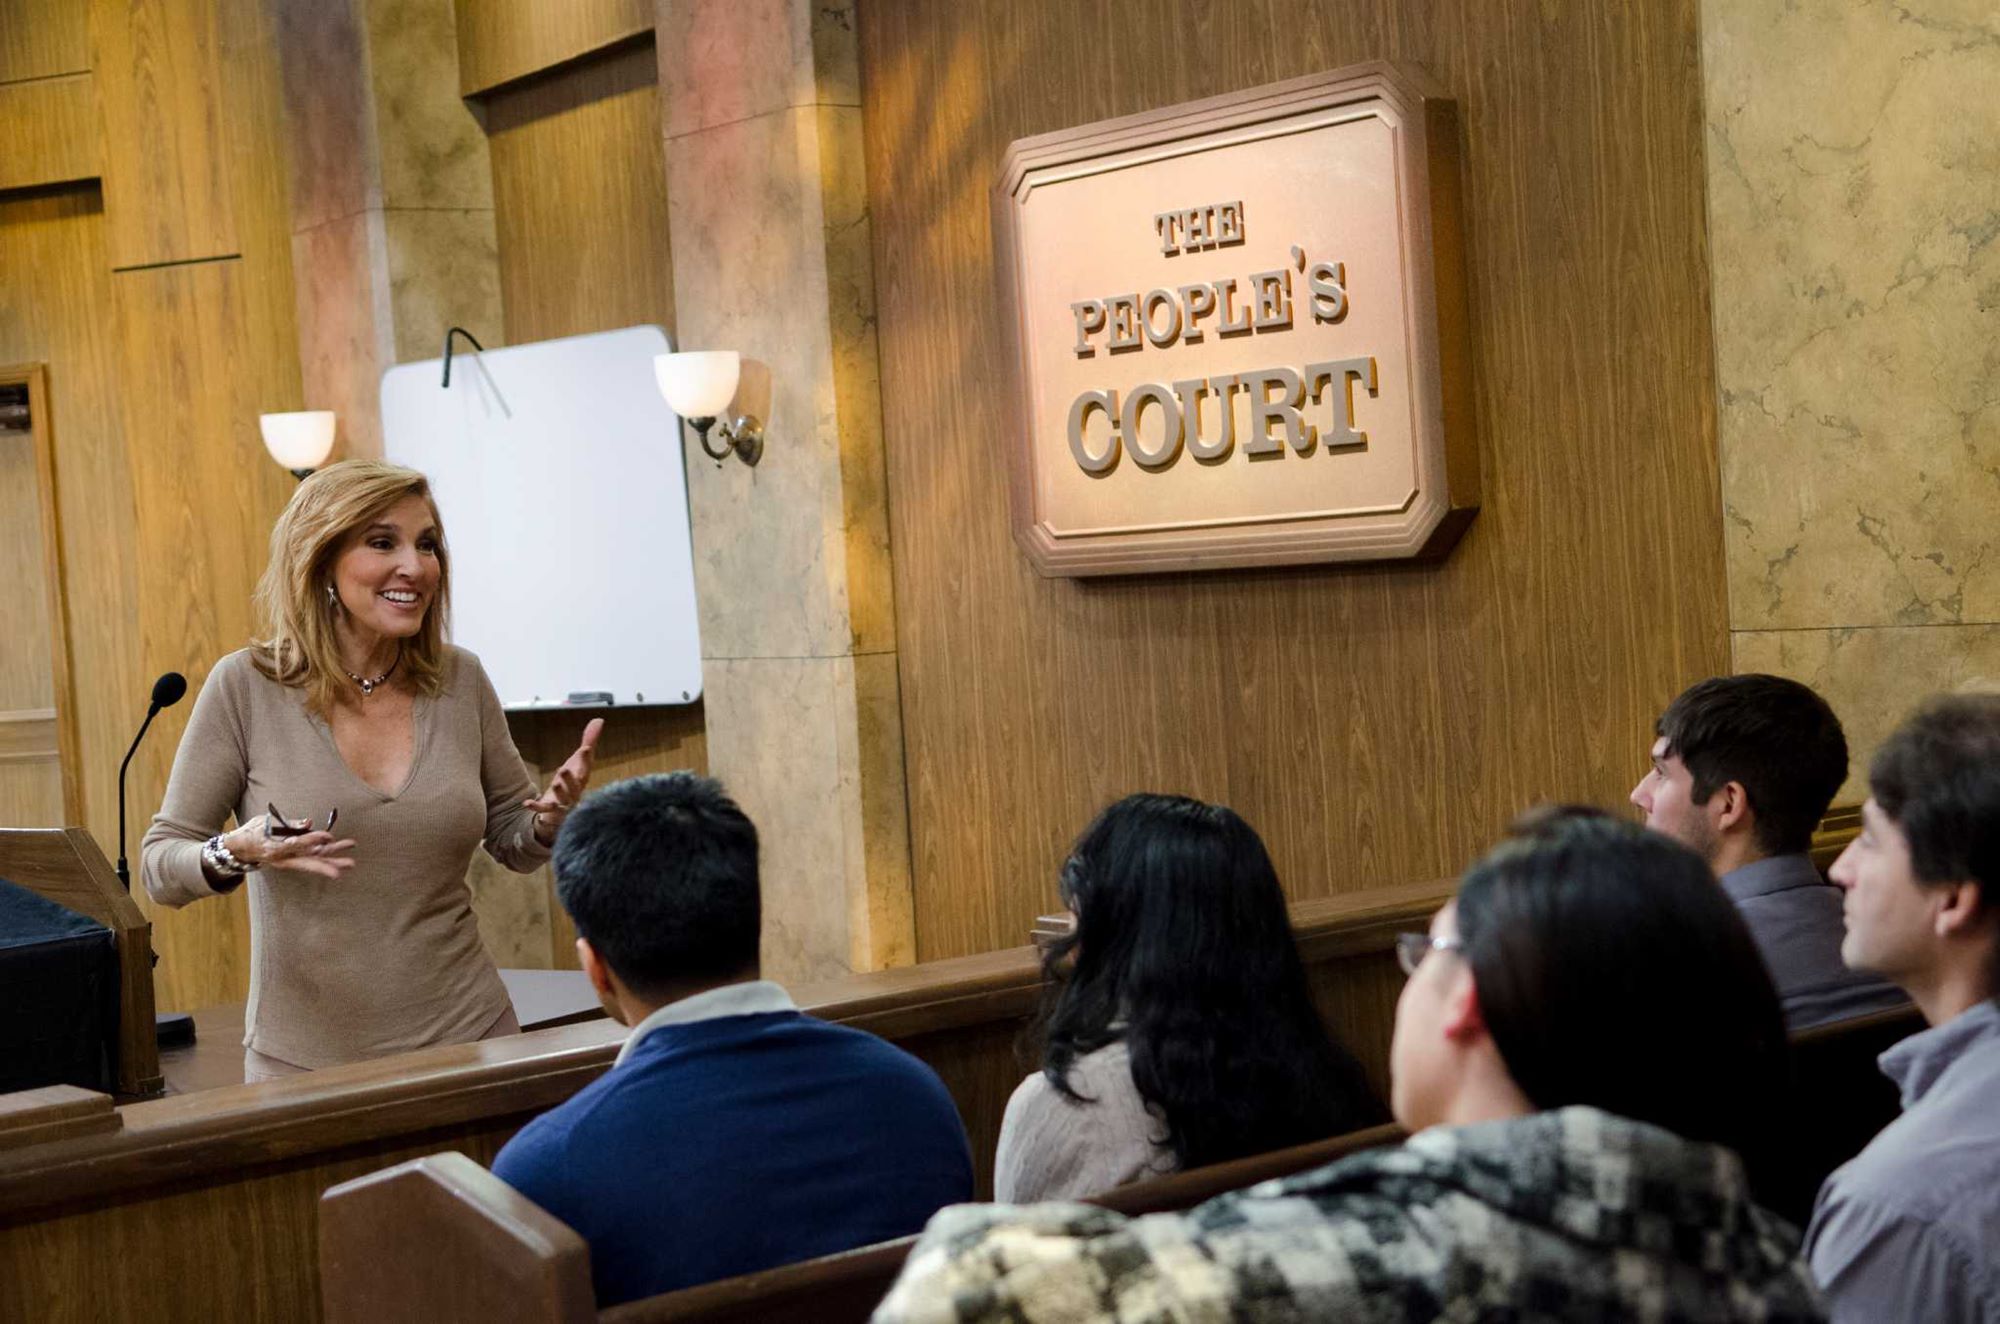 How To Watch The People’s Court Without Cable